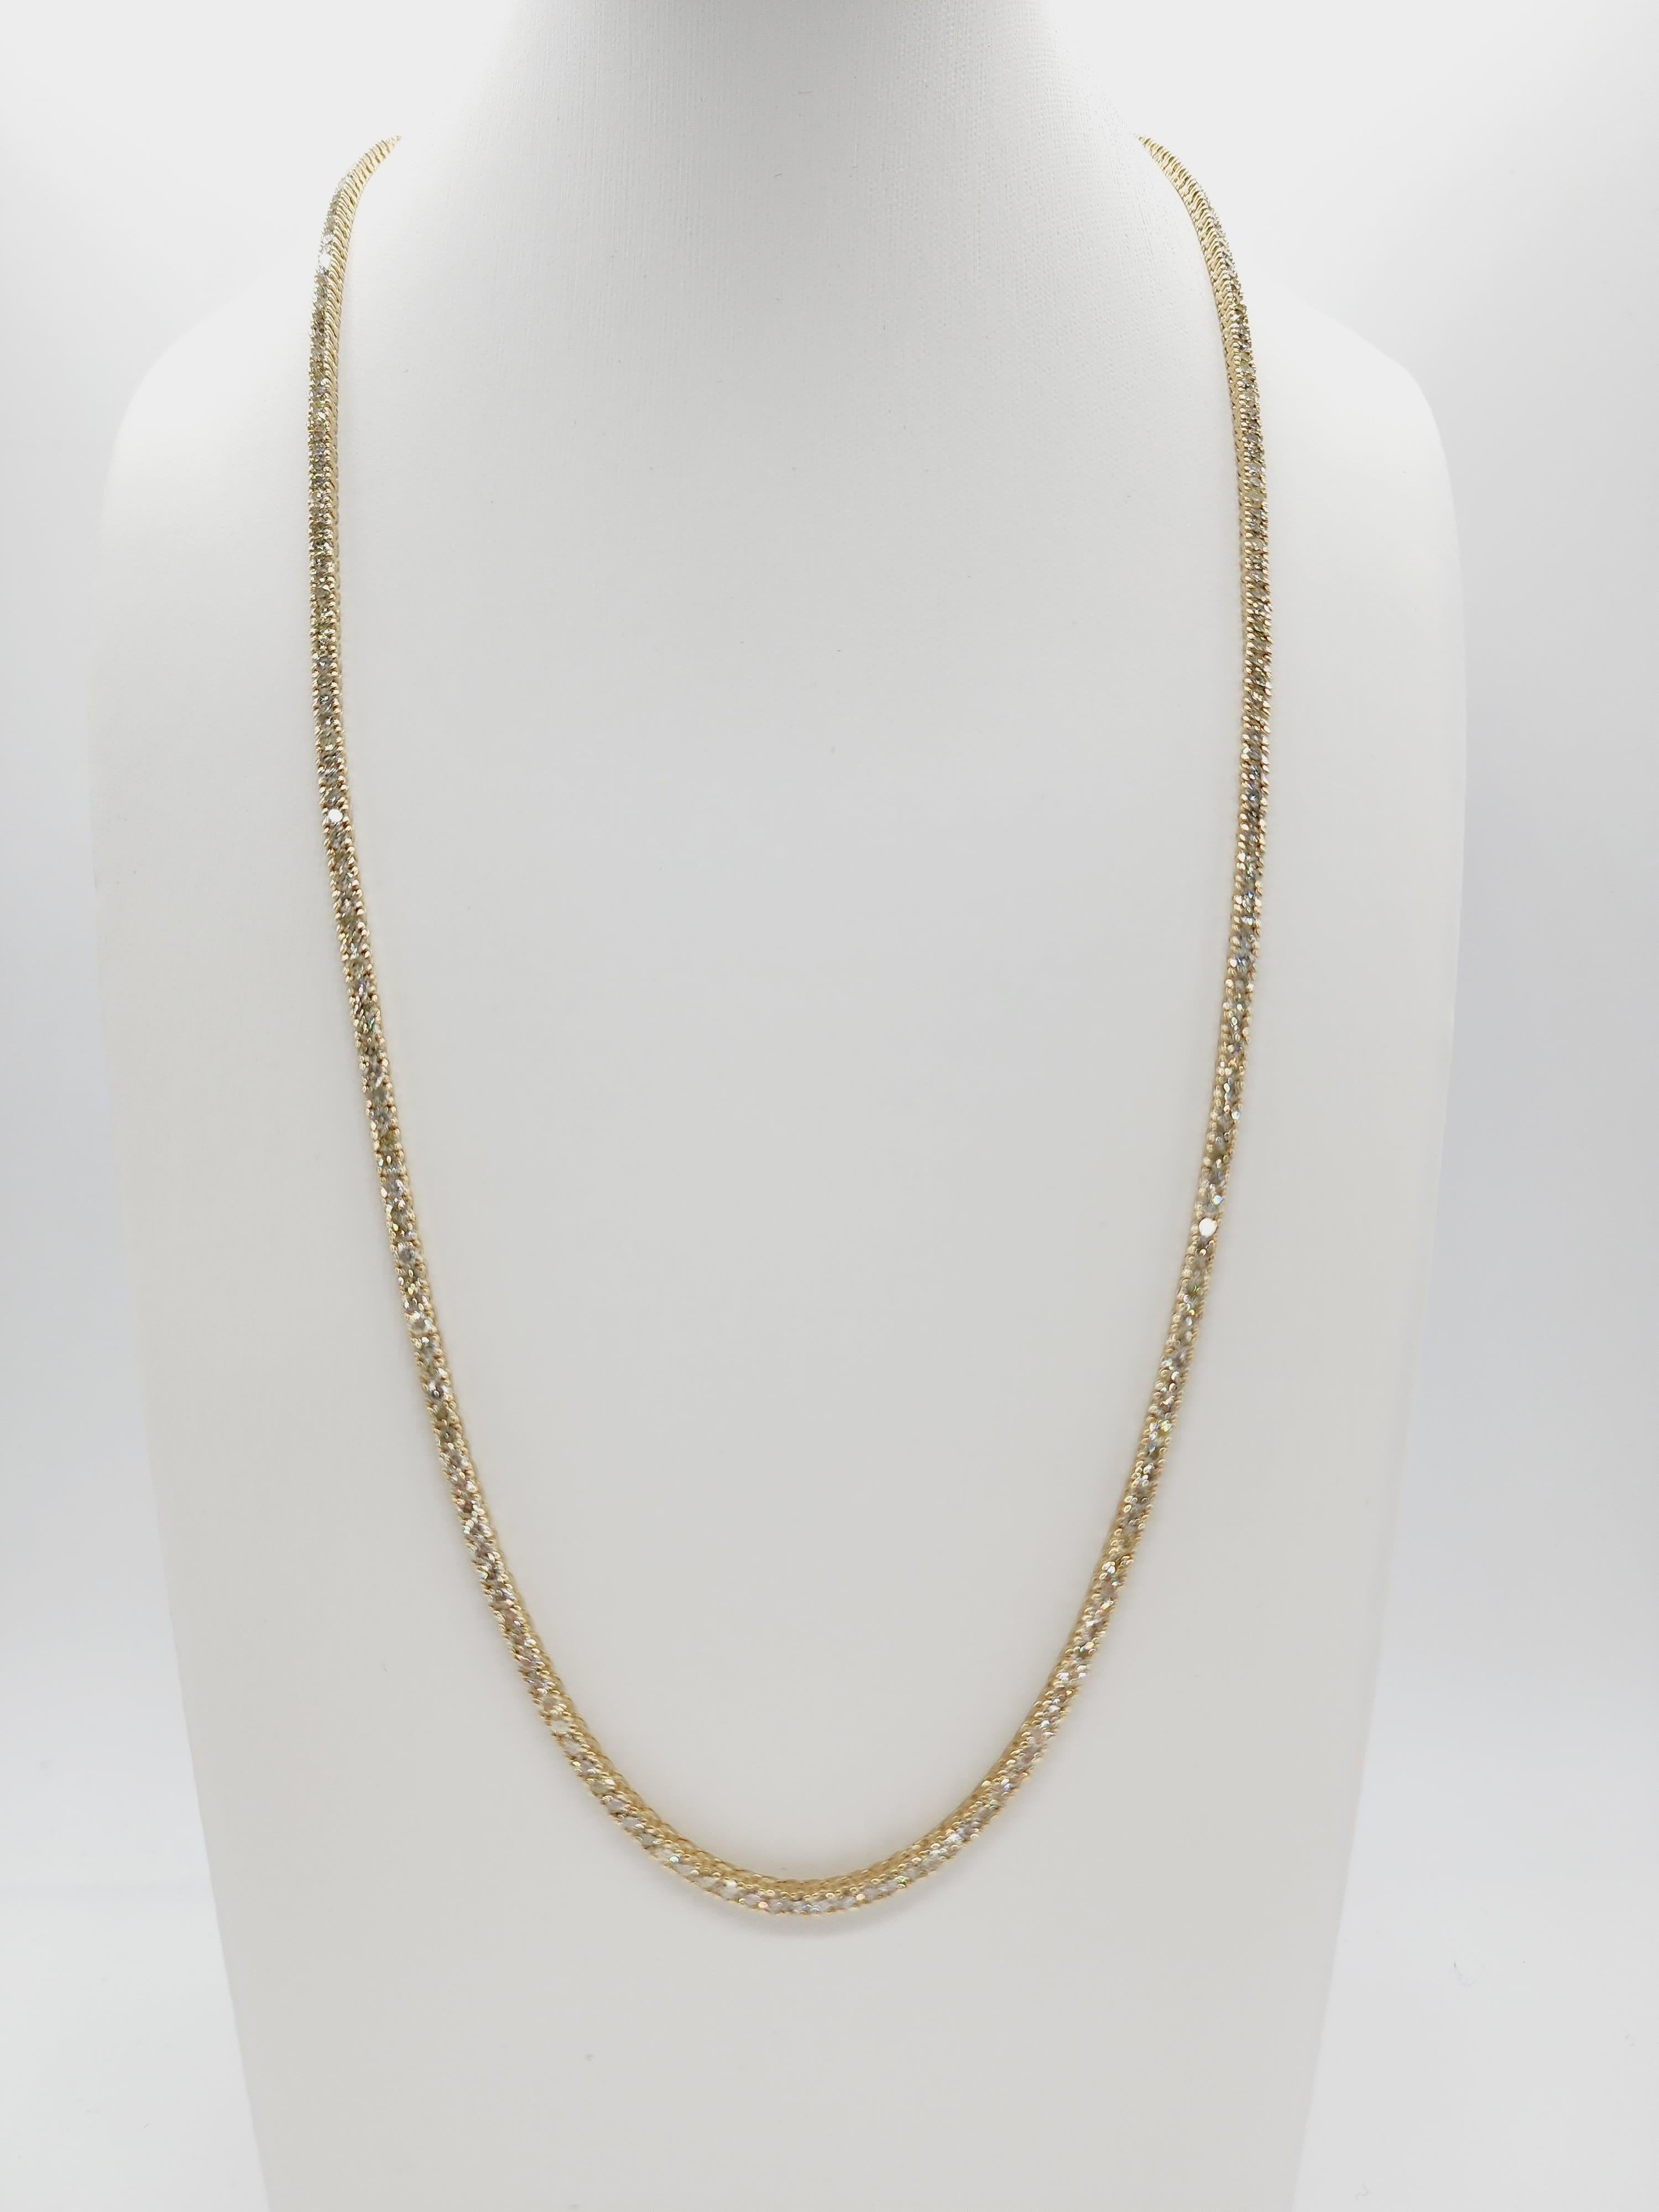 Brilliant and beautiful tennis necklace, natural round-brilliant cut white diamonds clean and Excellent shine. 
14k yellow gold classic four-prong style for maximum light brilliance. 
22 inch length. Average  I Color, SI-I Clarity.